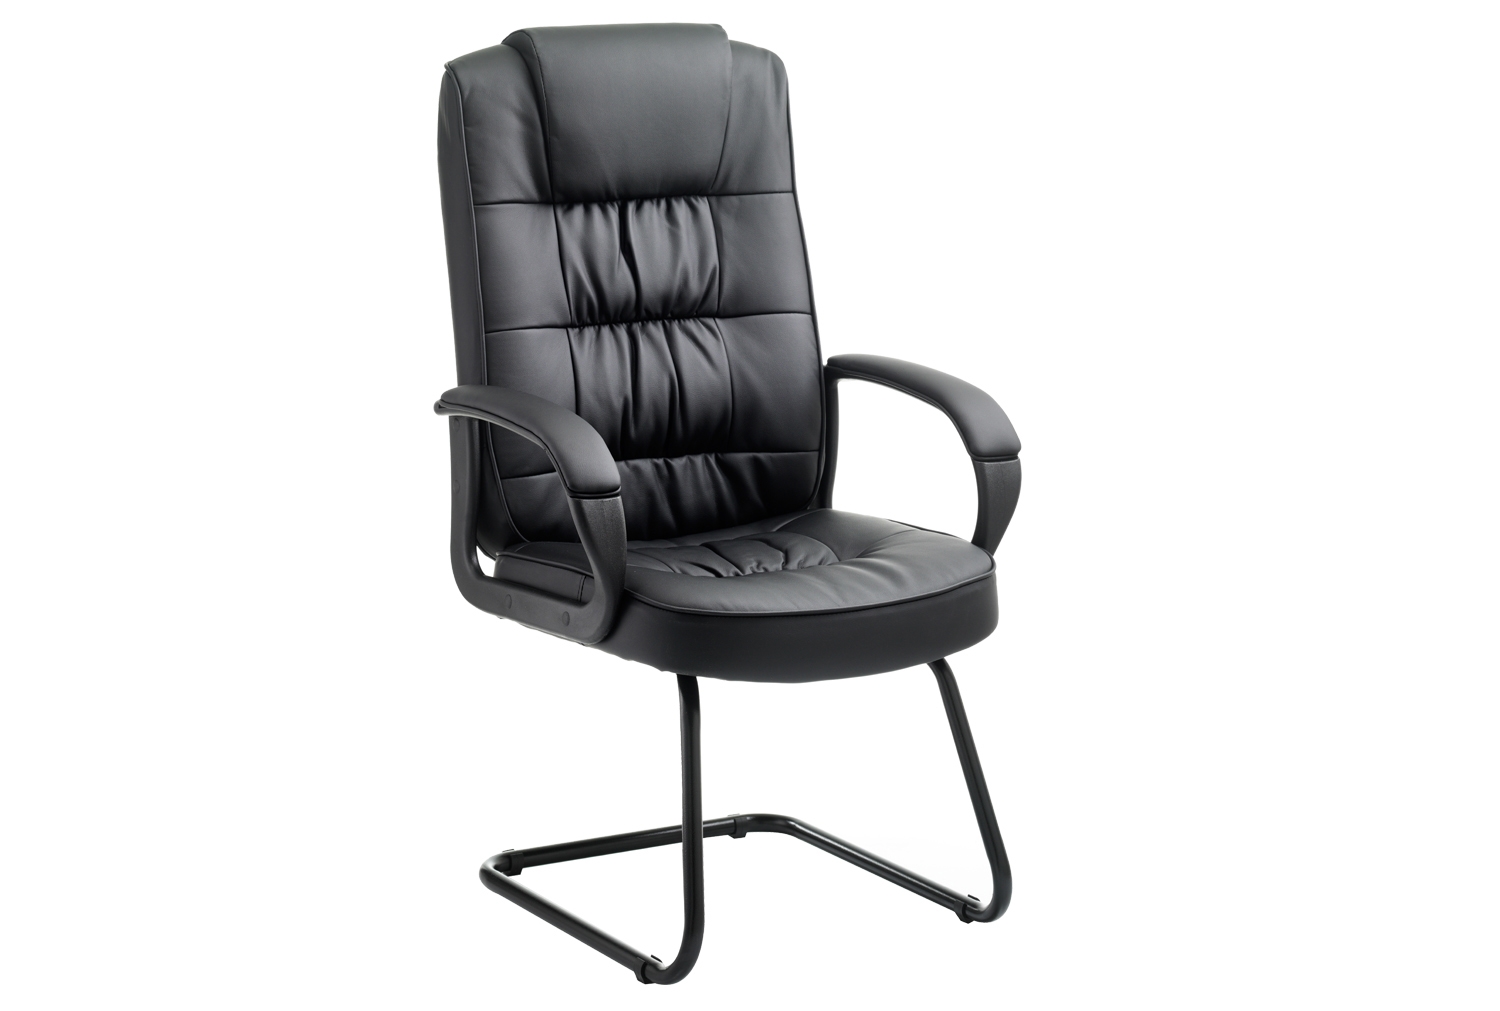 Muscat Leather Faced Visitor Office Chair, Black